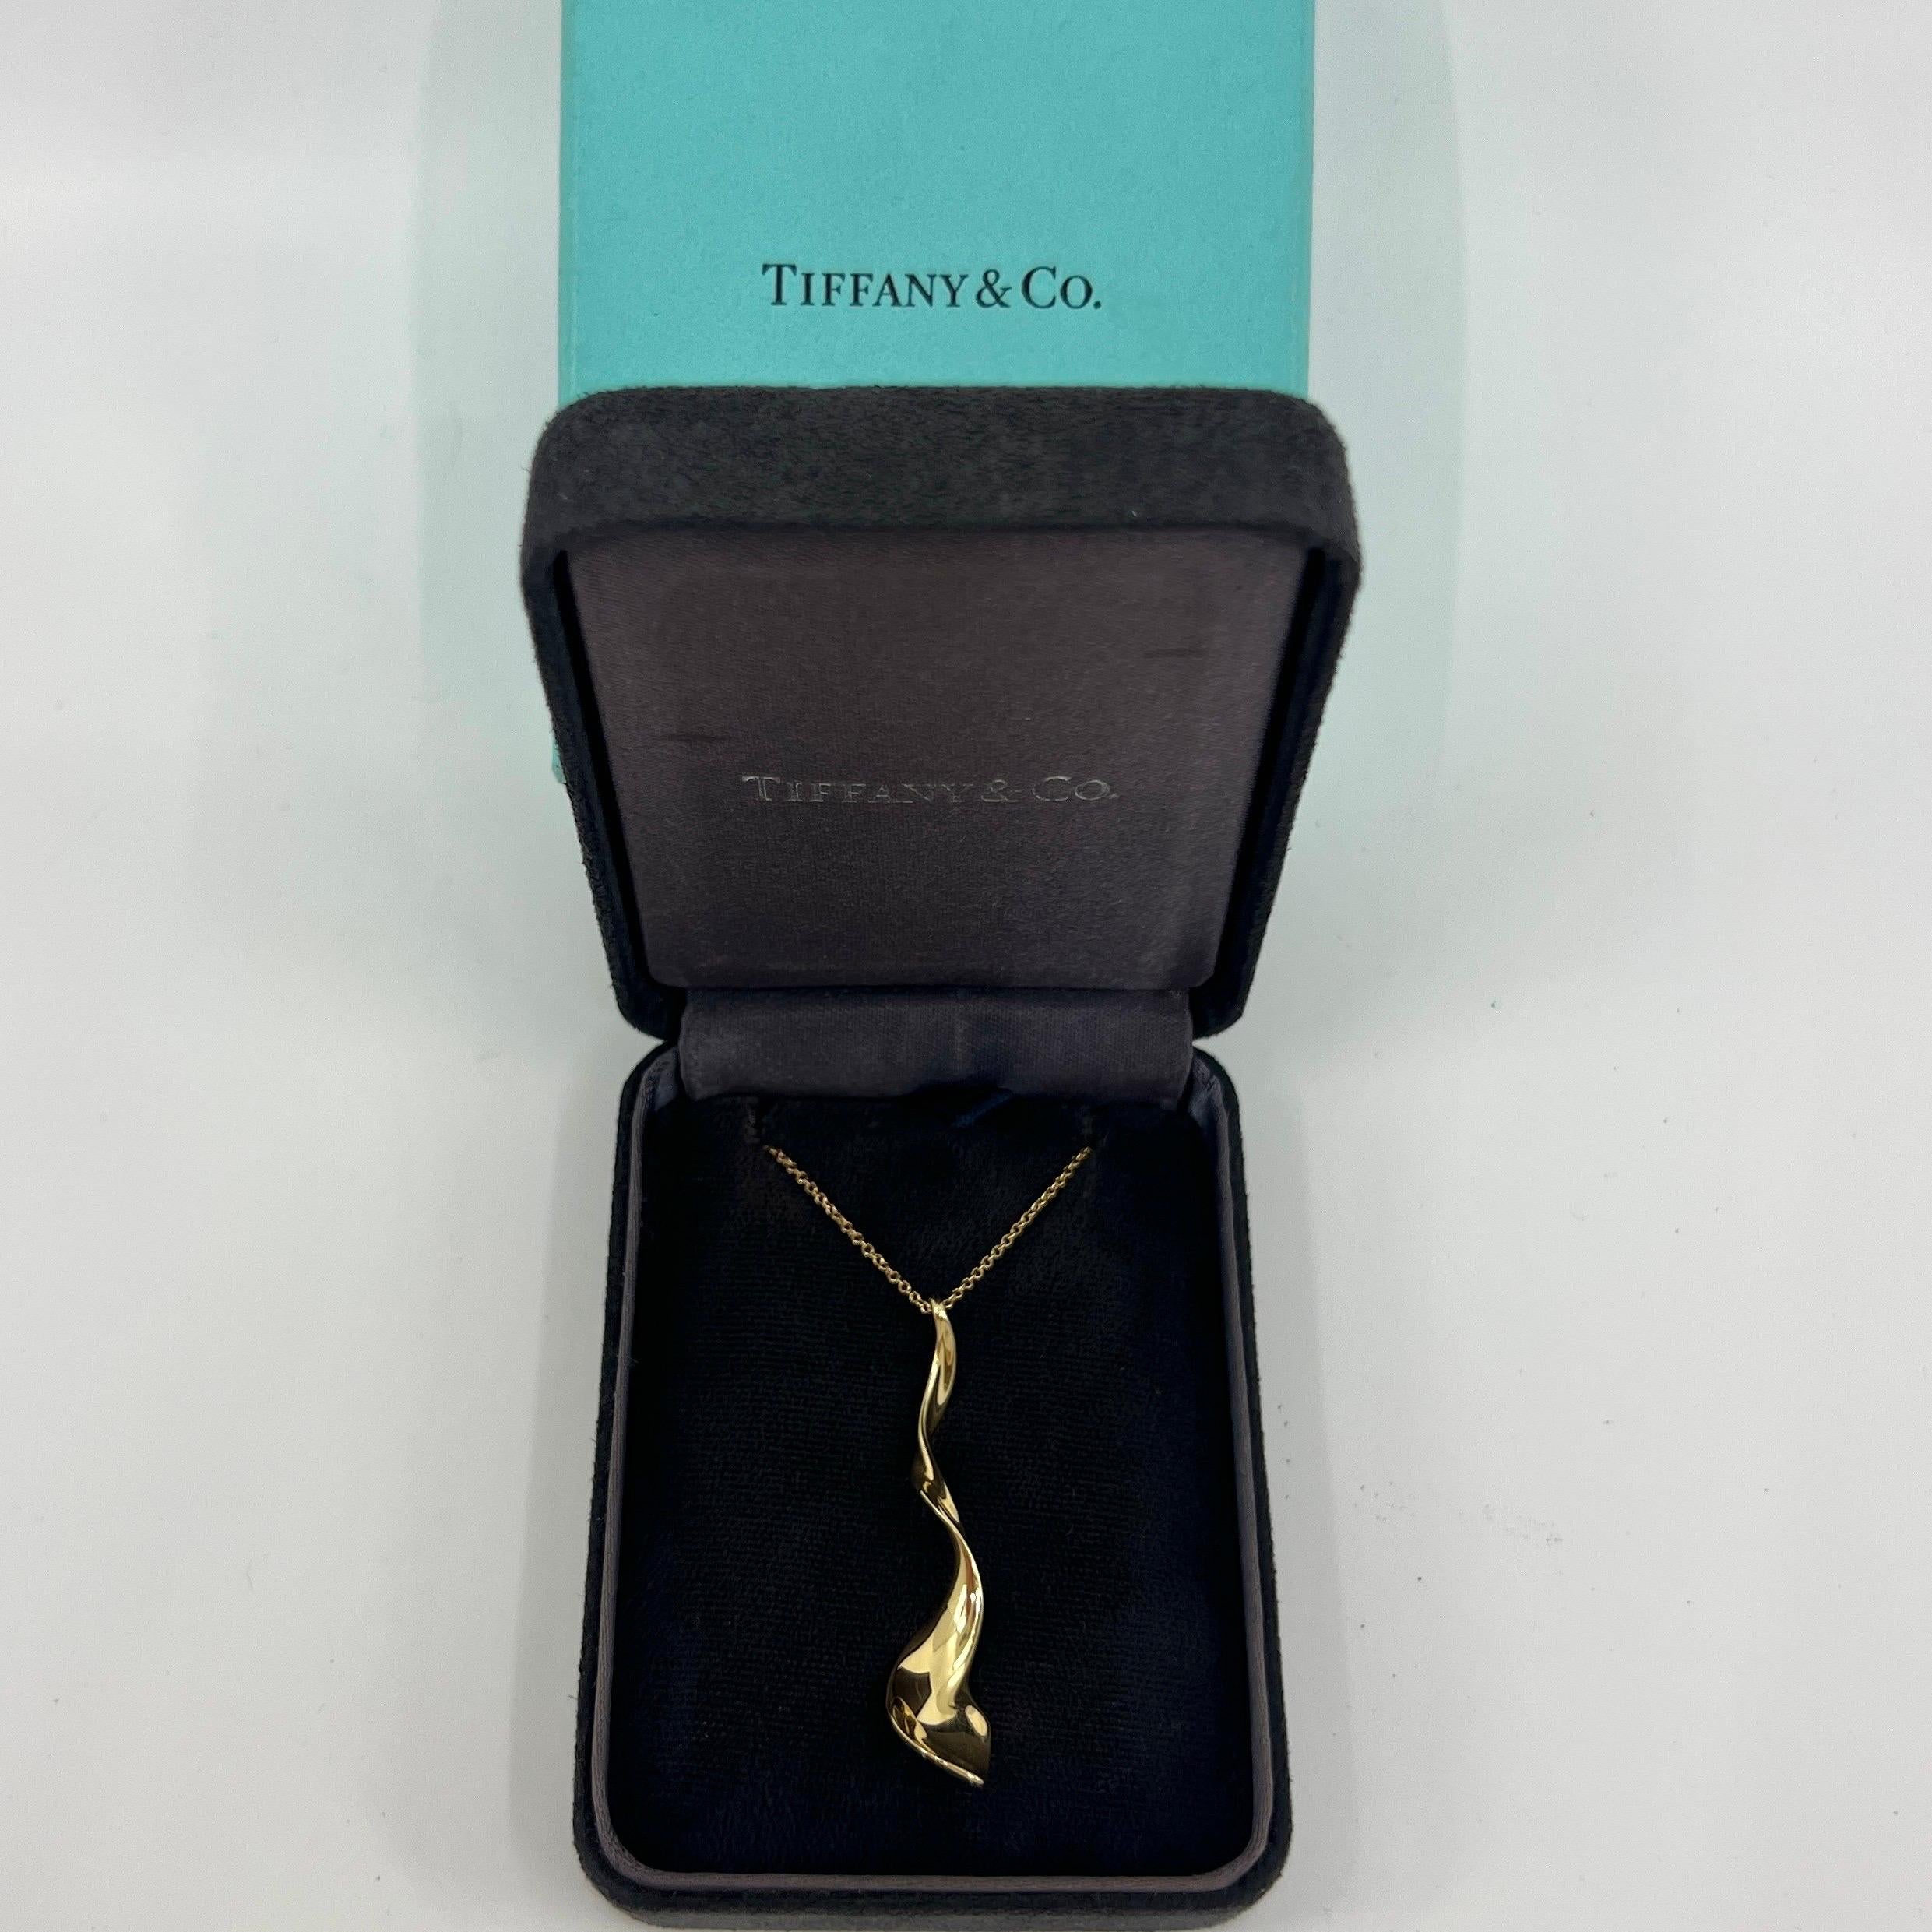 Tiffany & Co Frank Gehry 18k Yellow Gold Orchid Twist Spiral Pendant Necklace For Sale 4